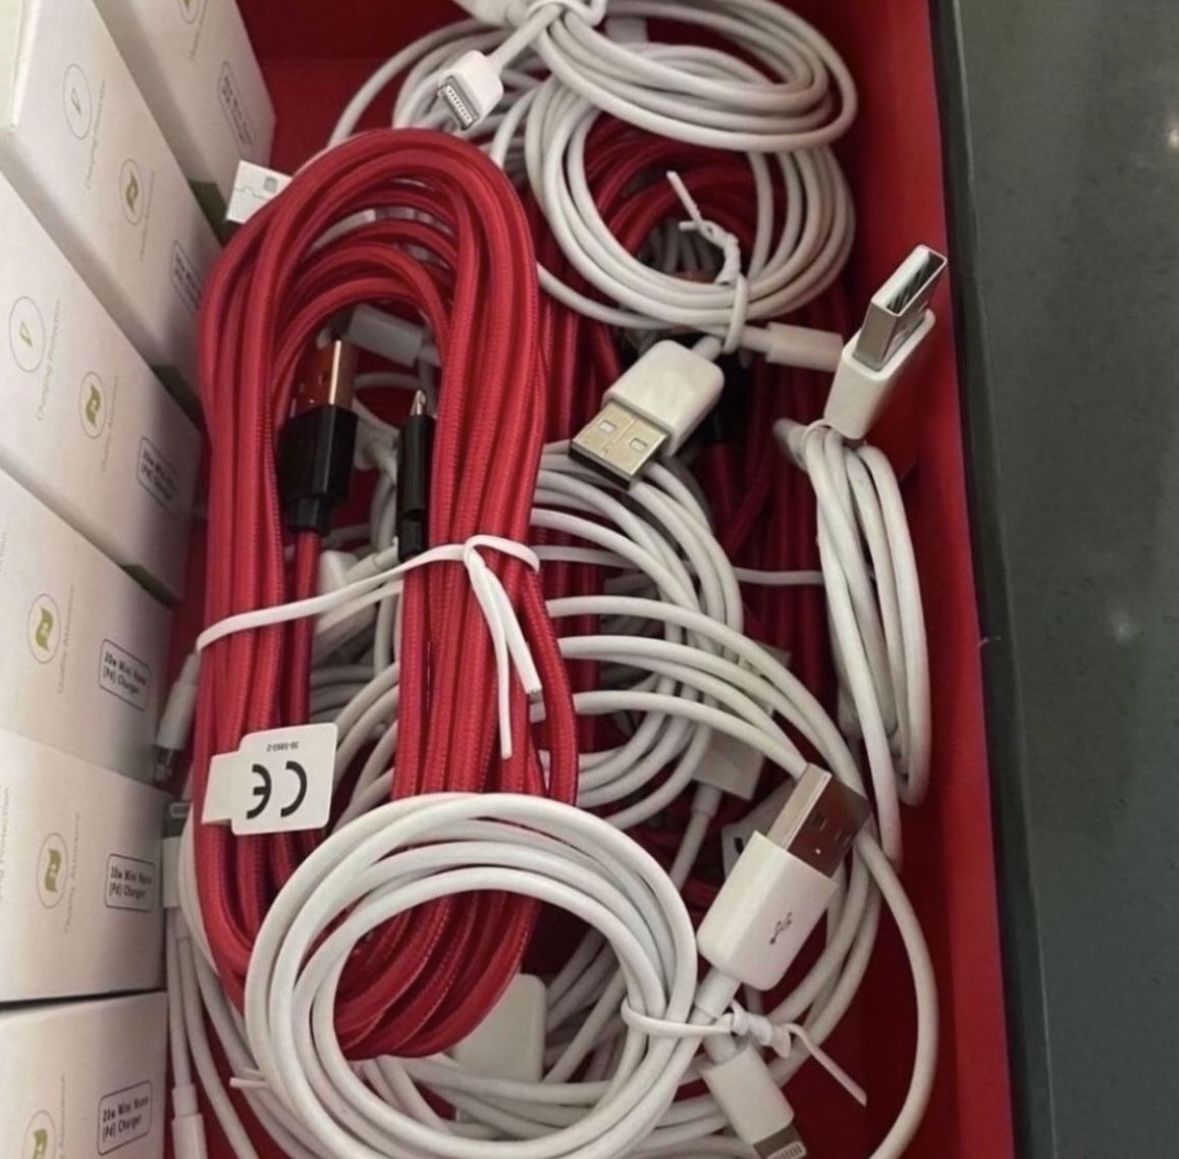 iPhone Chargers  8 For $12.00